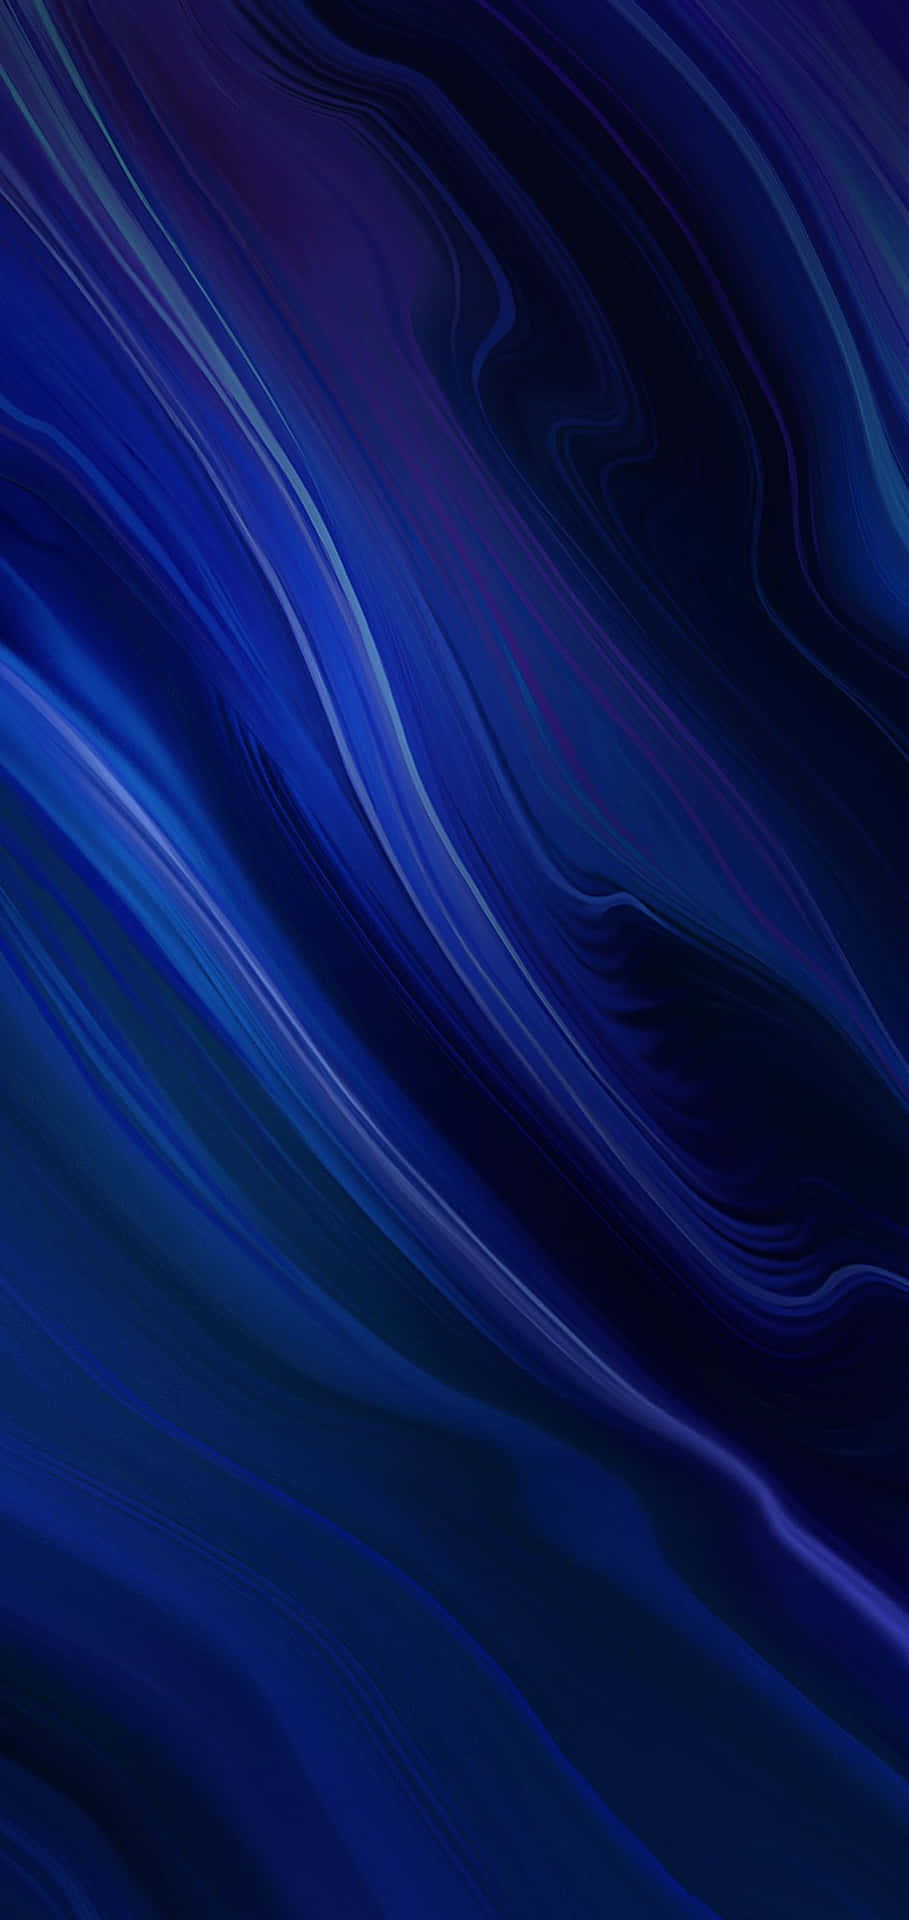 A Blue And Purple Abstract Background Wallpaper